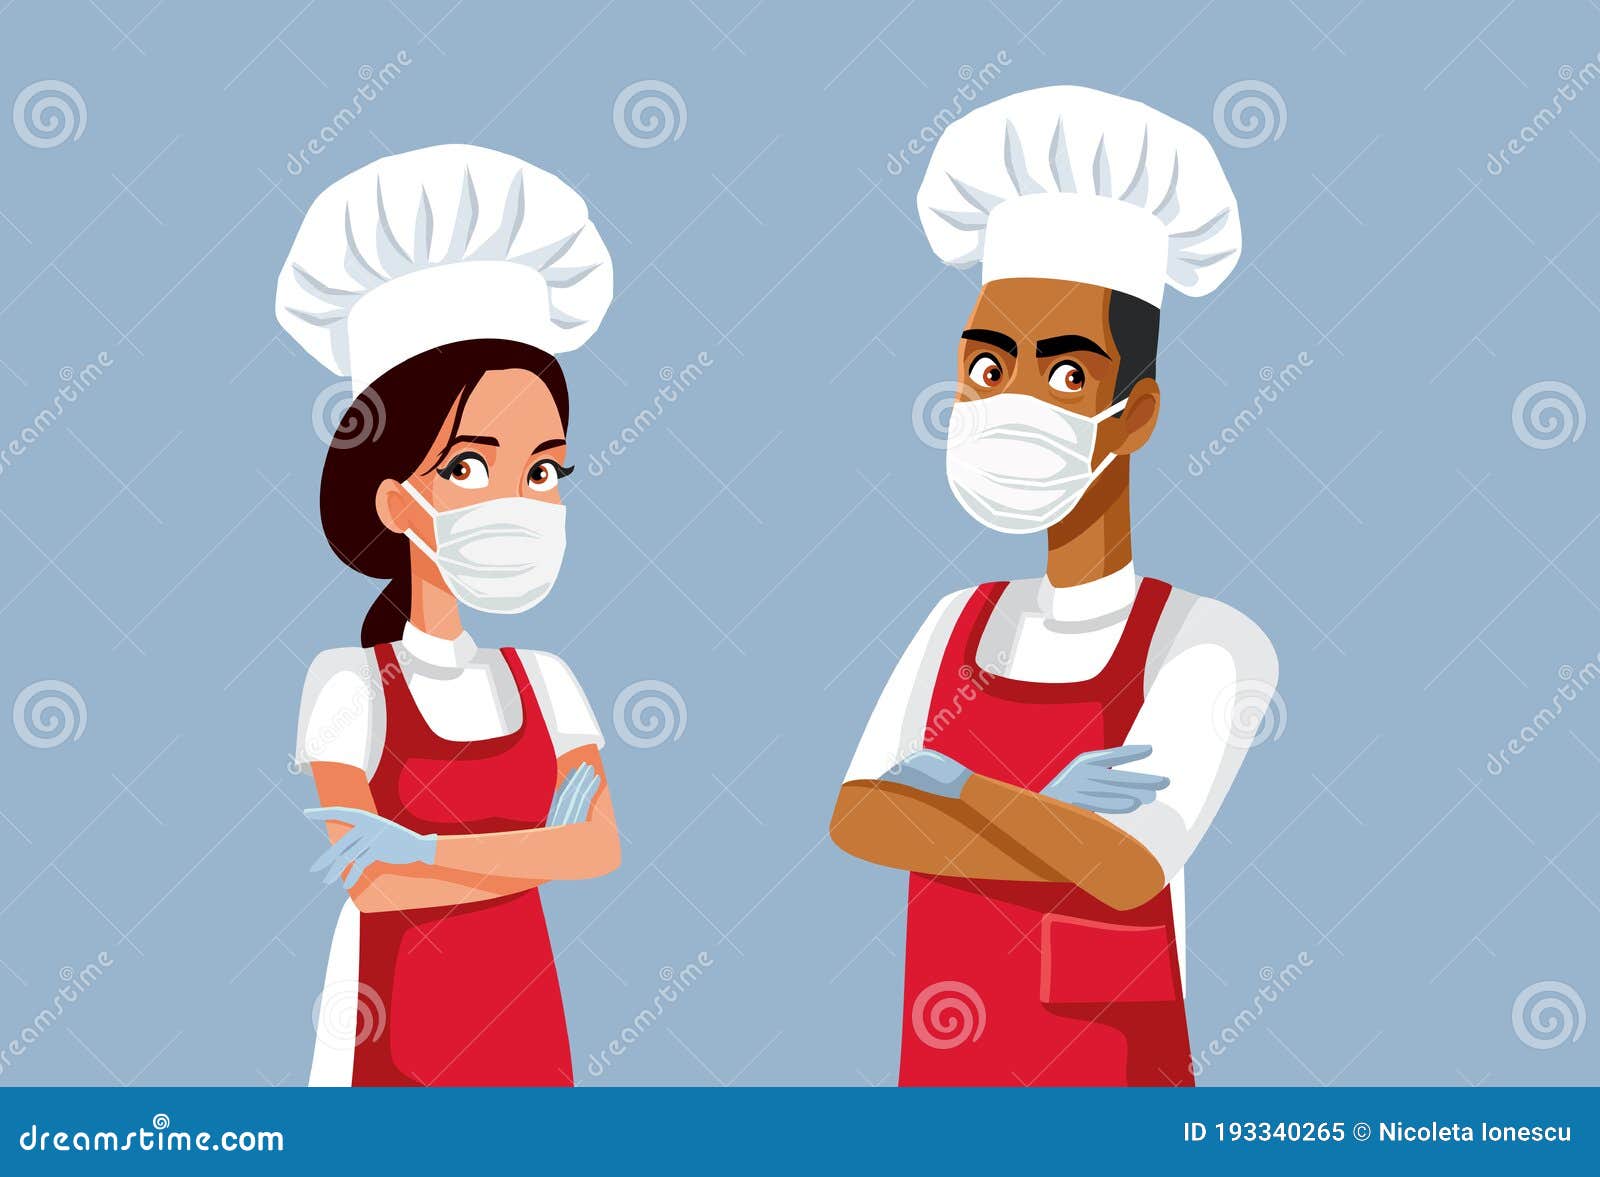 Wear your Personal Protective Equipment, Cook PPE, Kitchen safety, Cooking safety, Food safety, Kitchen safety rules, Commercial kitchen  safety, Restaurant kitchen safety, Kitchen safety poster